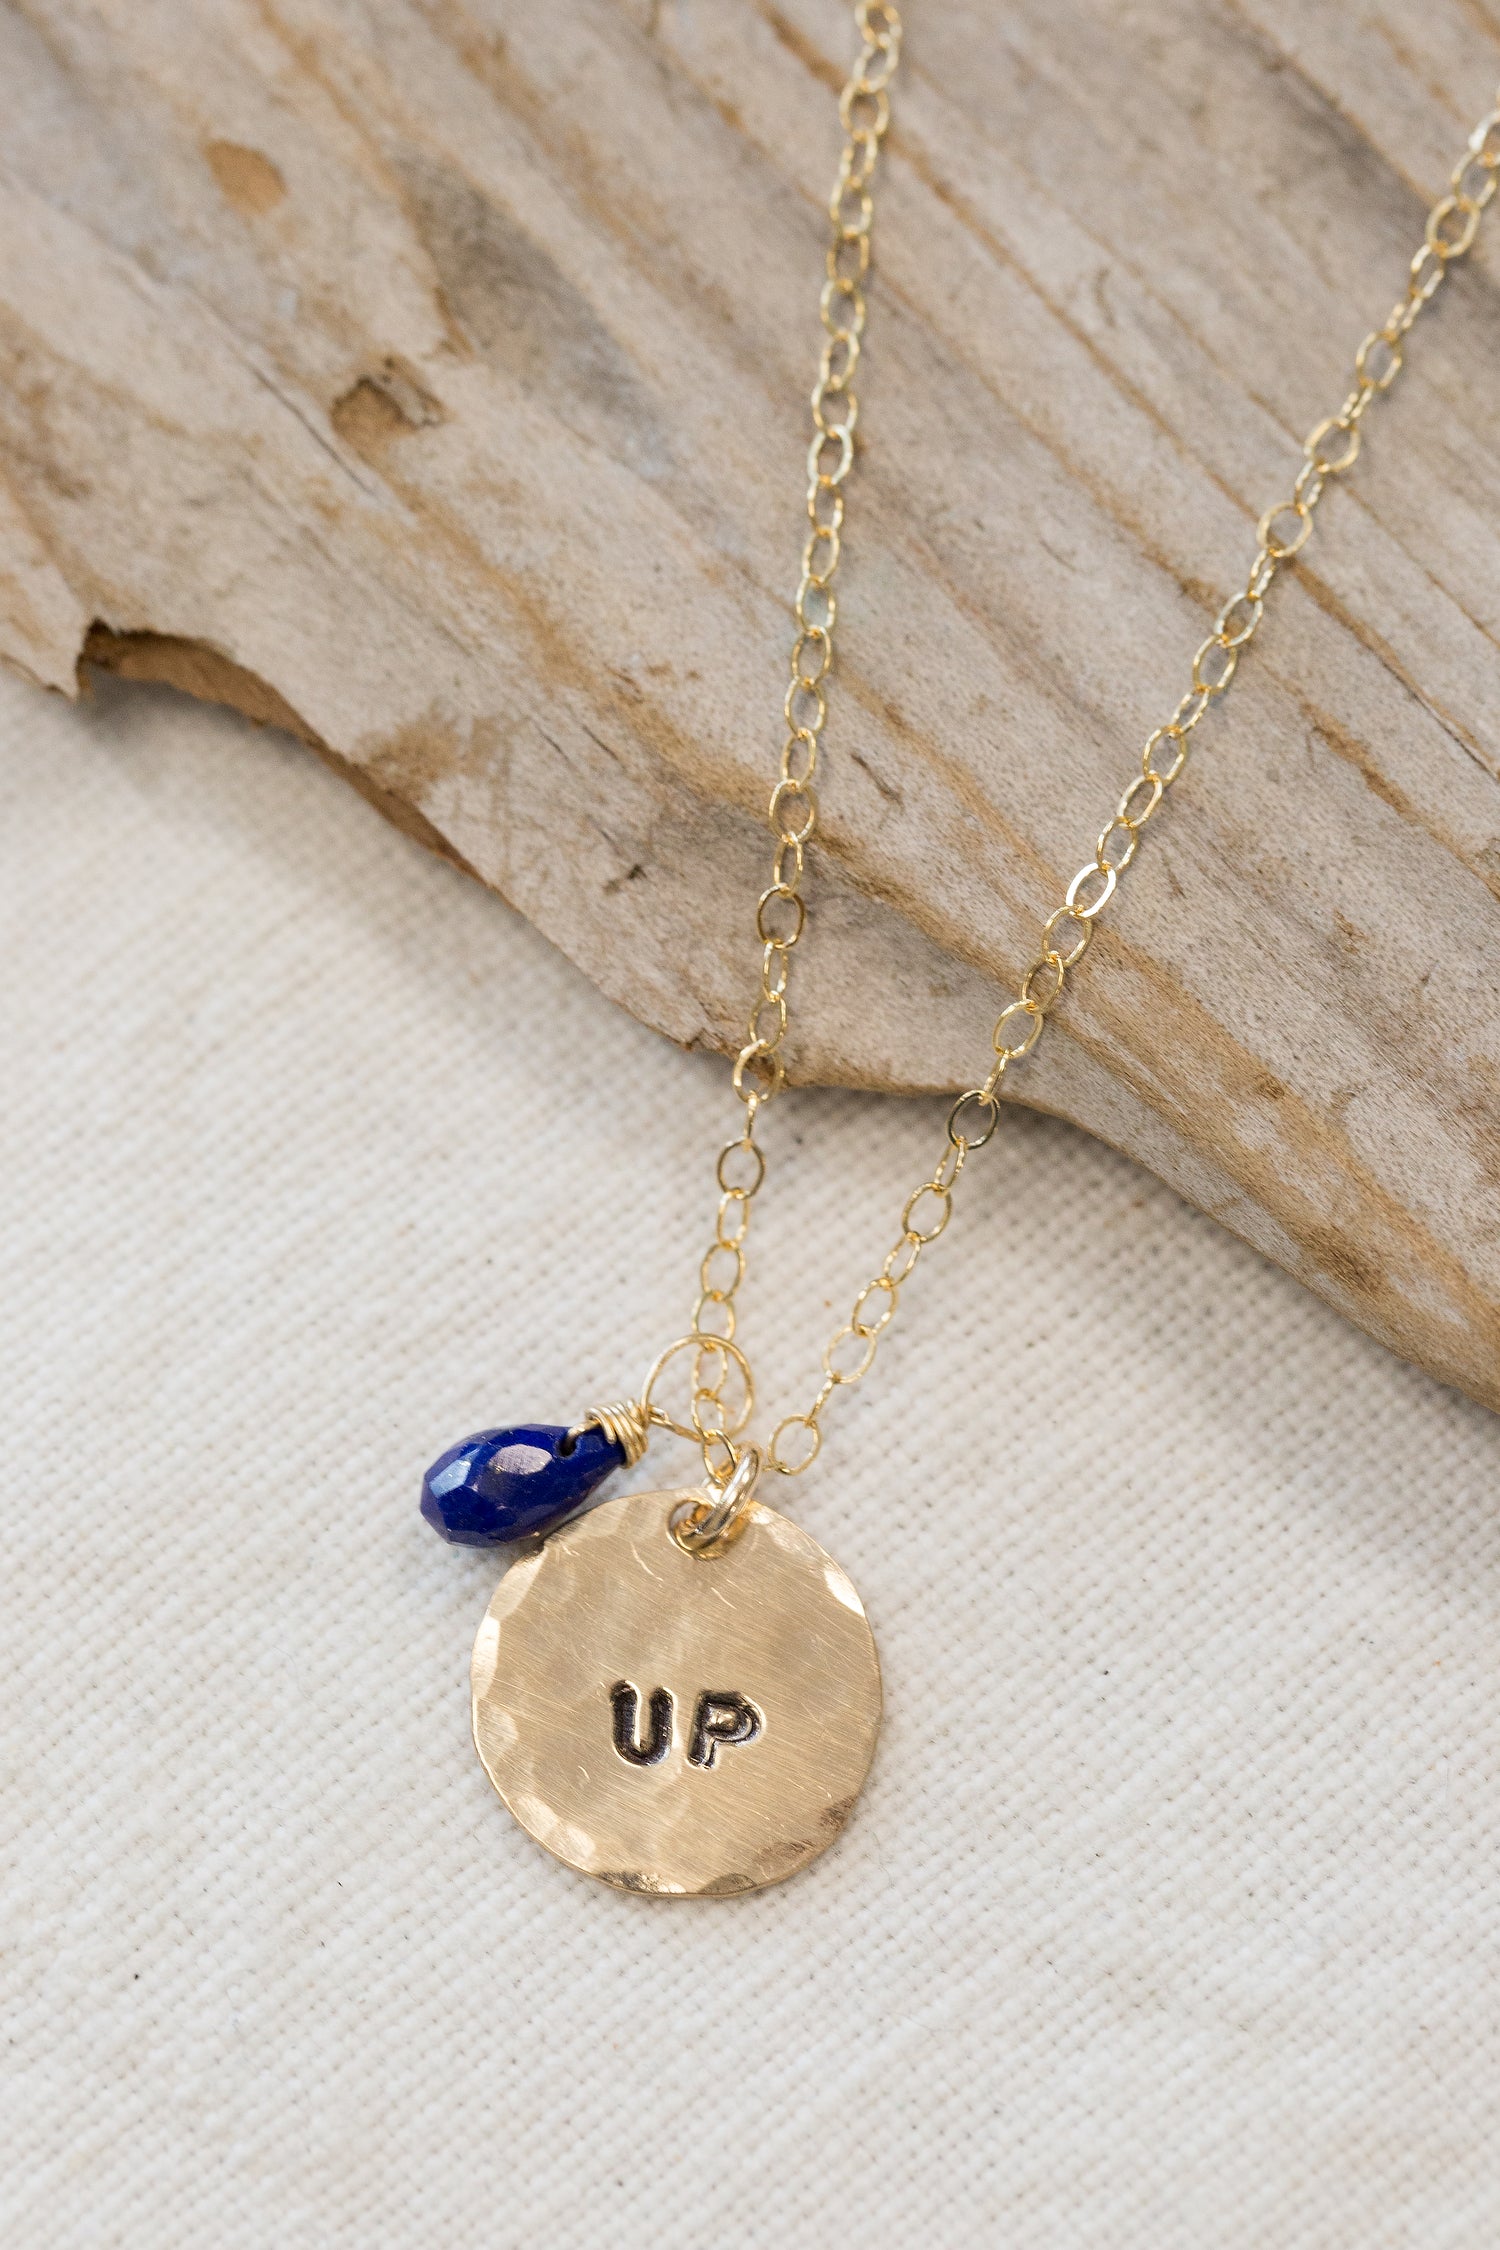 Hand-Stamped "Up" Necklace